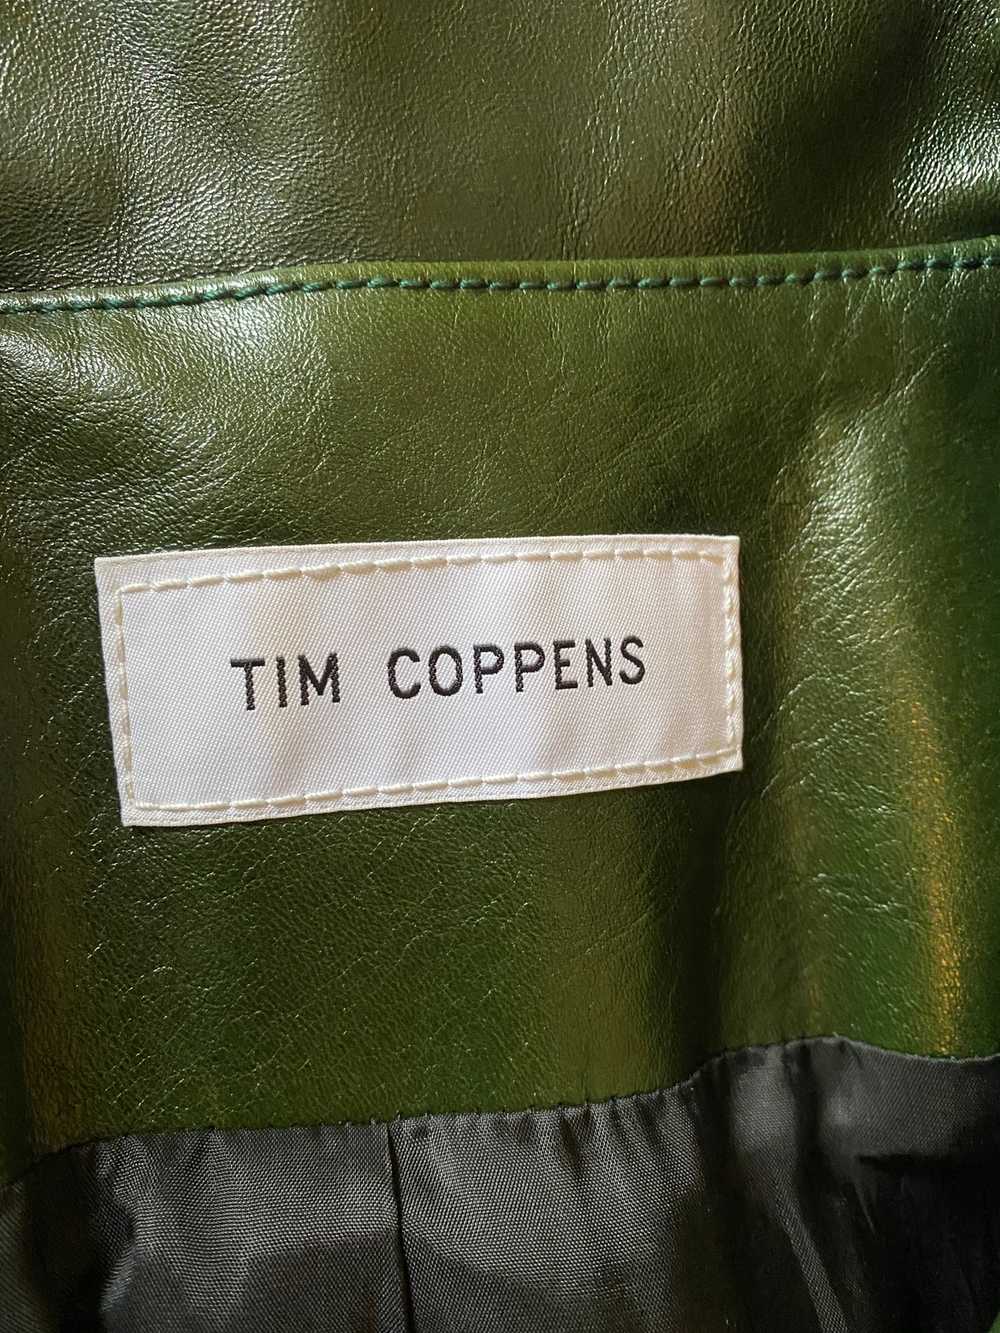 Tim Coppens Tim Coppens Leather Jacket - image 4